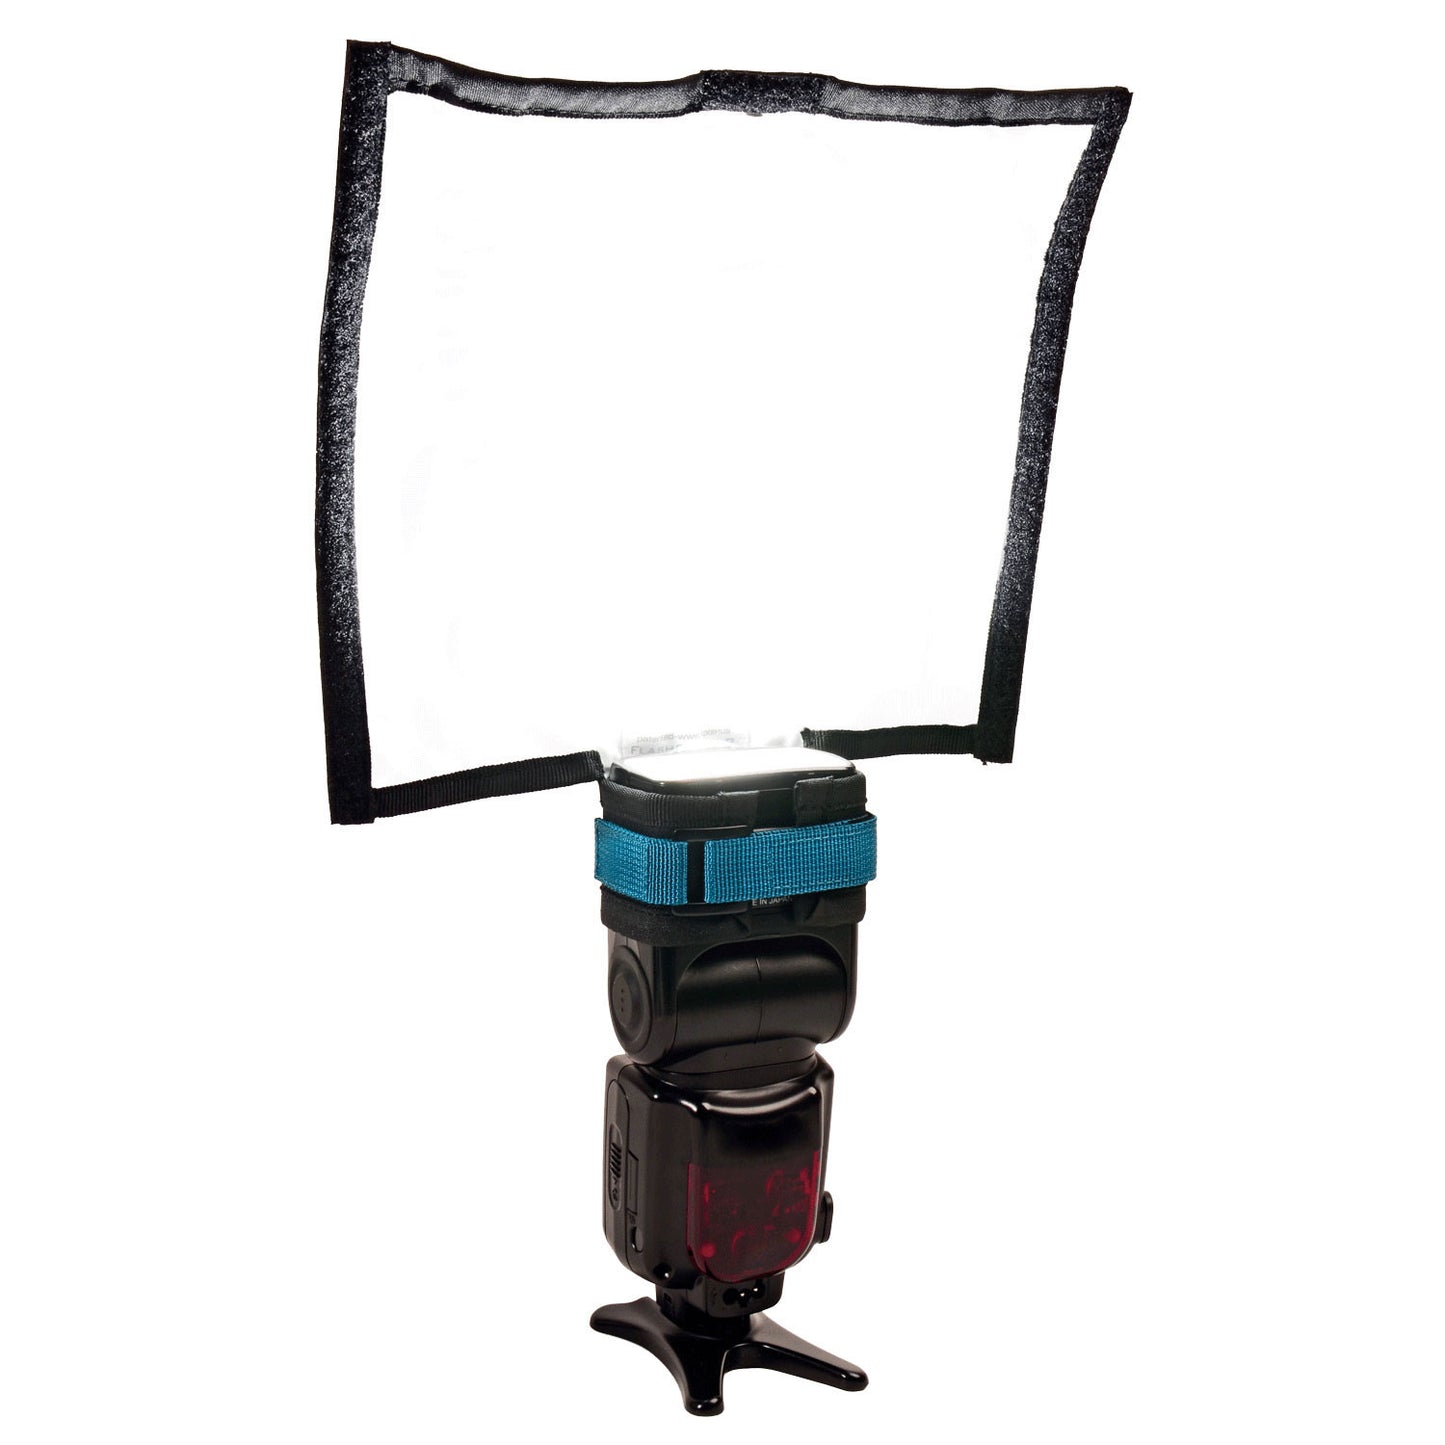 
                  
                    FACTORY SECOND:  Rogue FlashBender 2 - LARGE Reflector
                  
                